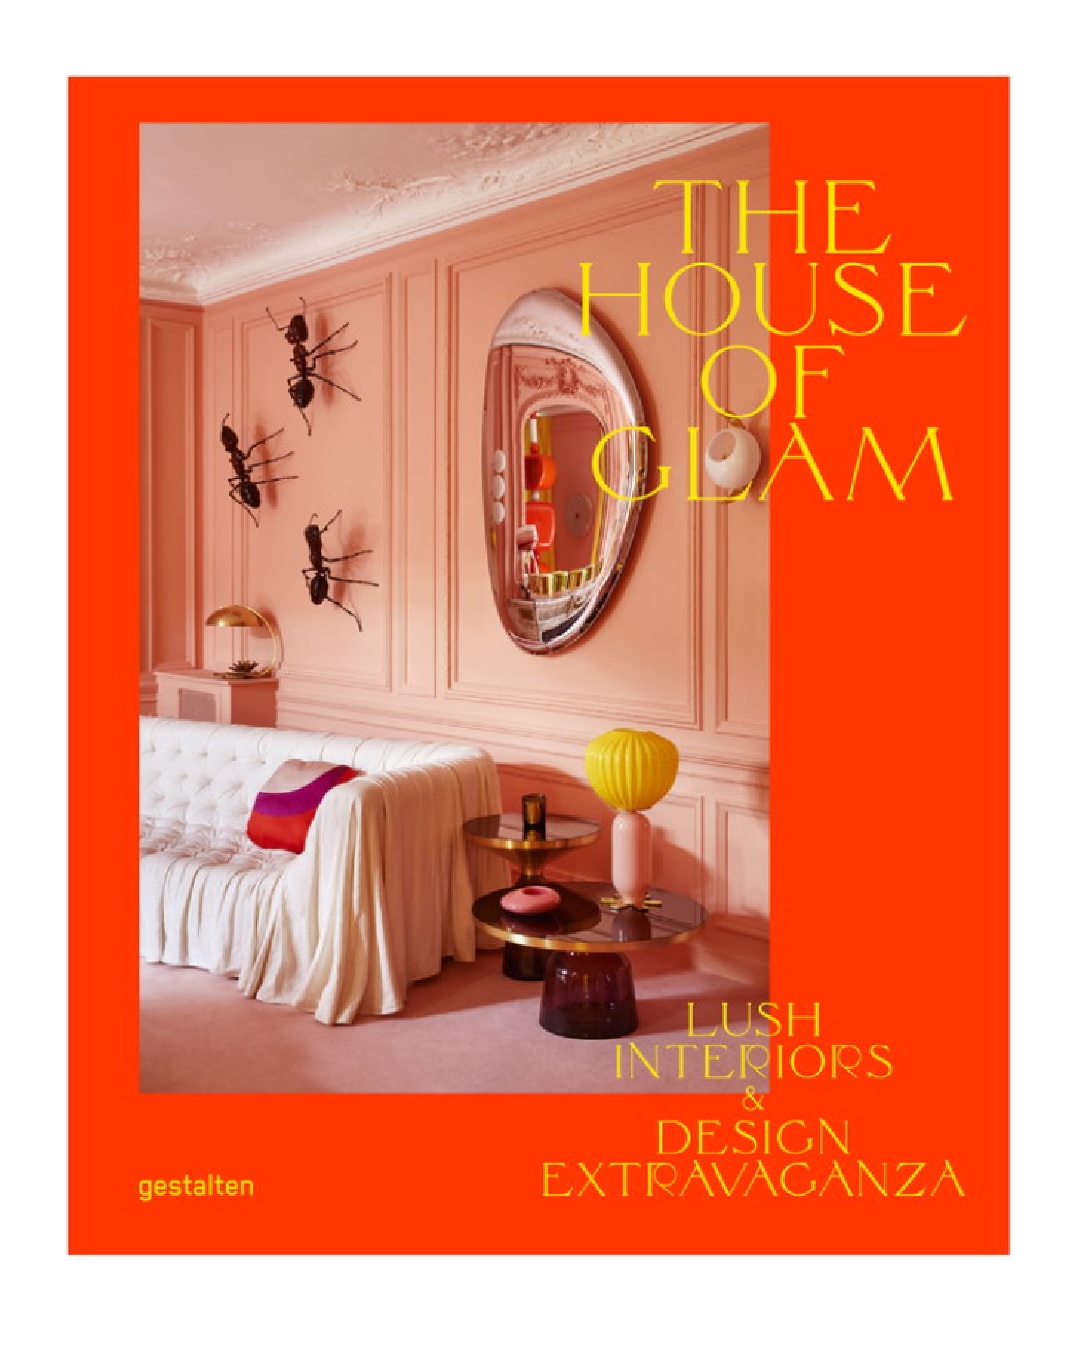 The house of glam book